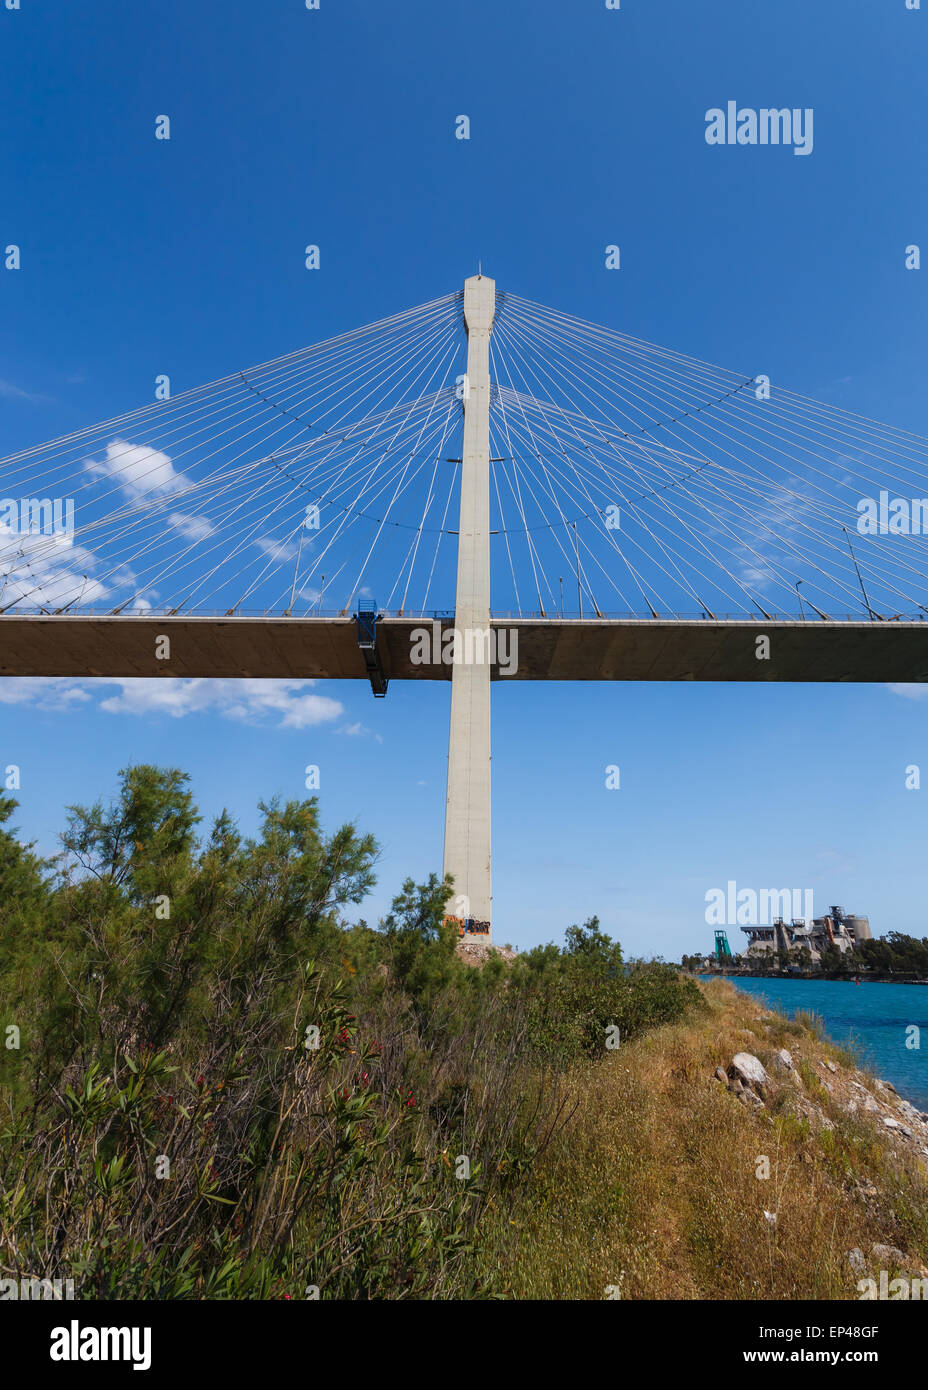 The new cable bridge of Chalkida, Greece that connects the island of Evia  with mainland Greece against a blue sky Stock Photo - Alamy